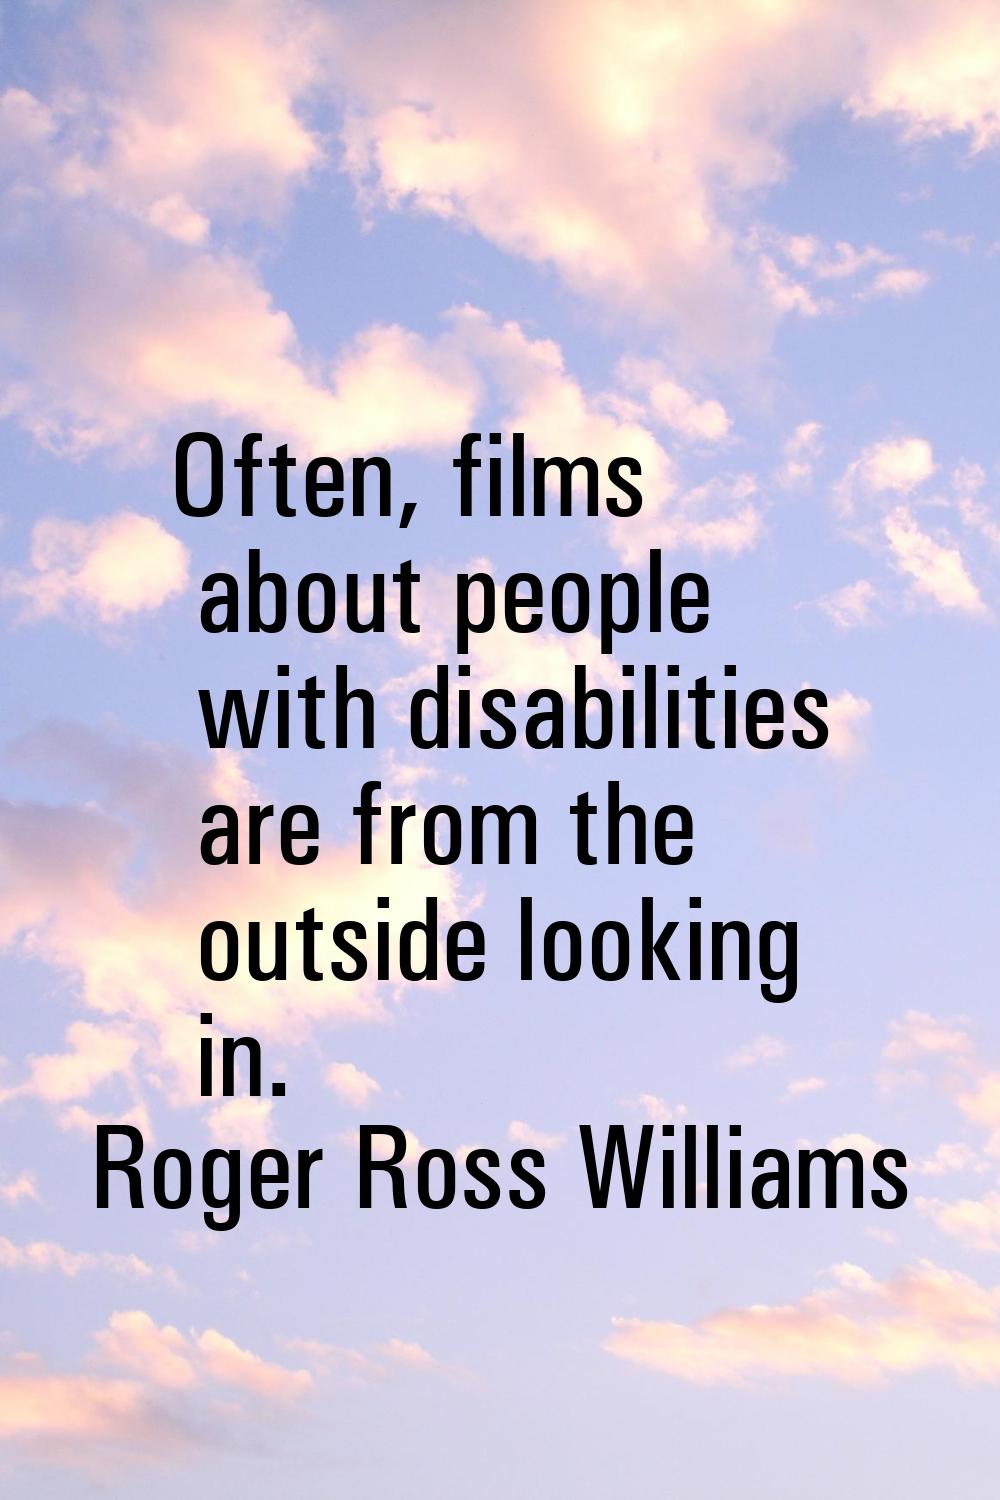 Often, films about people with disabilities are from the outside looking in.